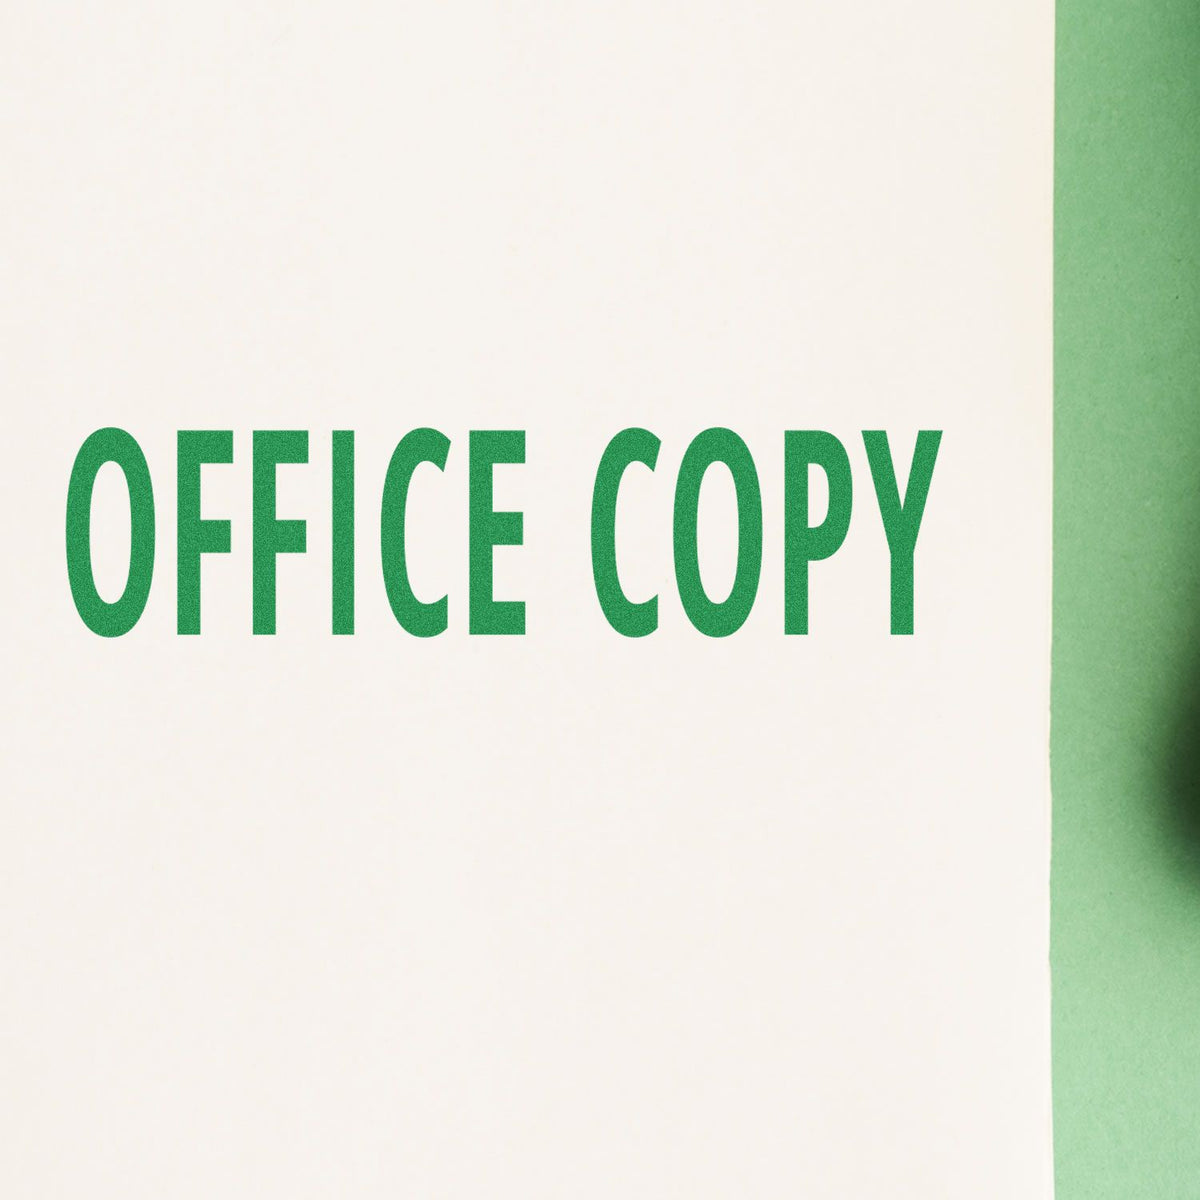 Large Self-Inking Office Copy Stamp In Use